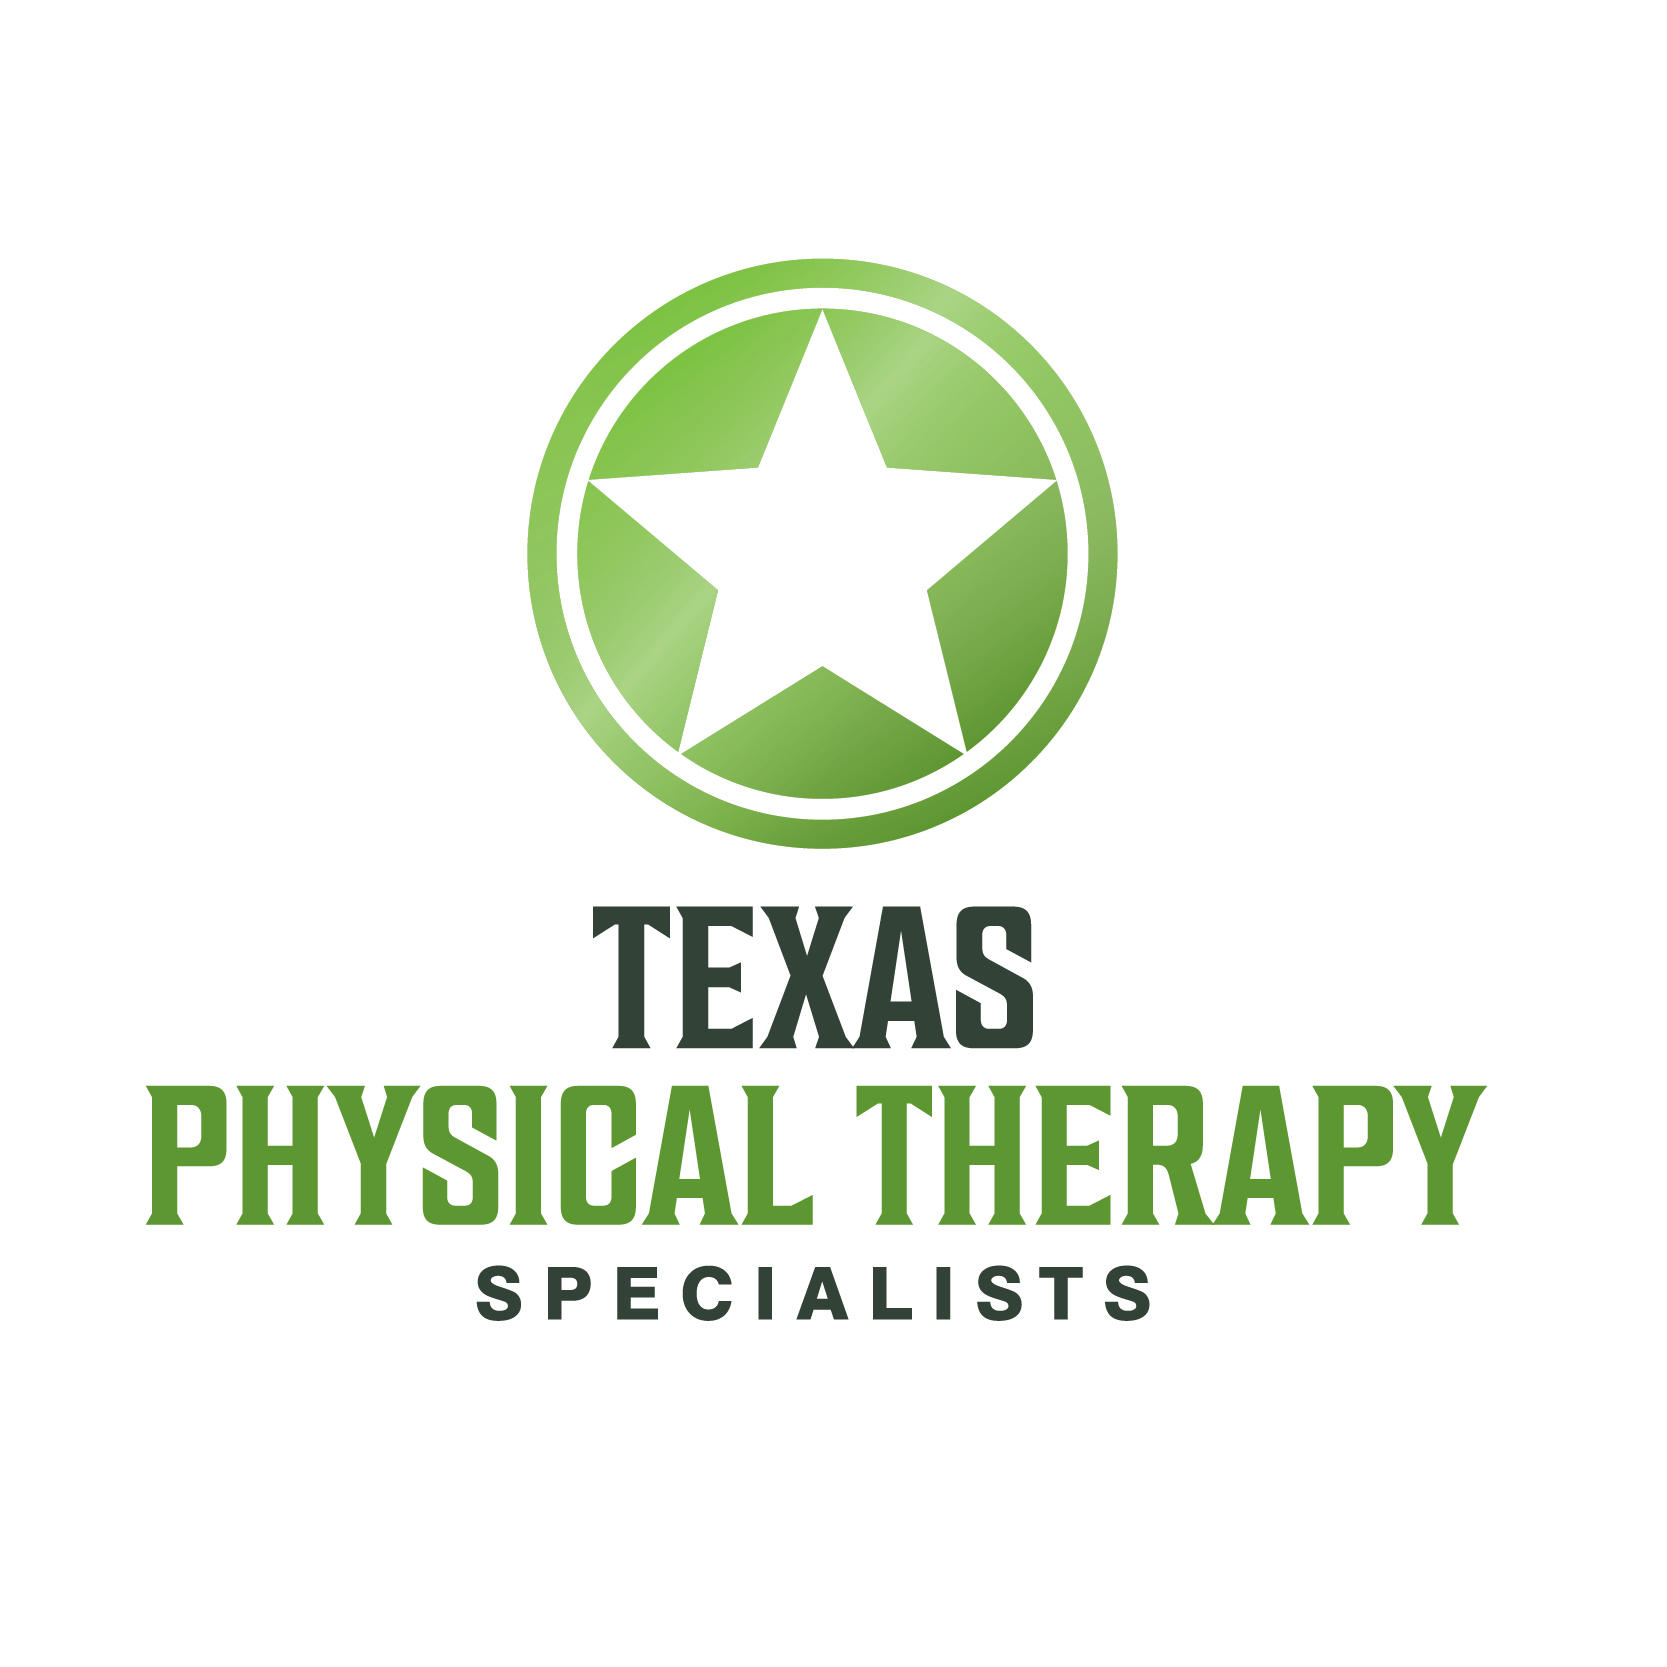 Texas Physical Therapy Specialists 20475 TX-46 Suite 104, Bulverde Texas 78070